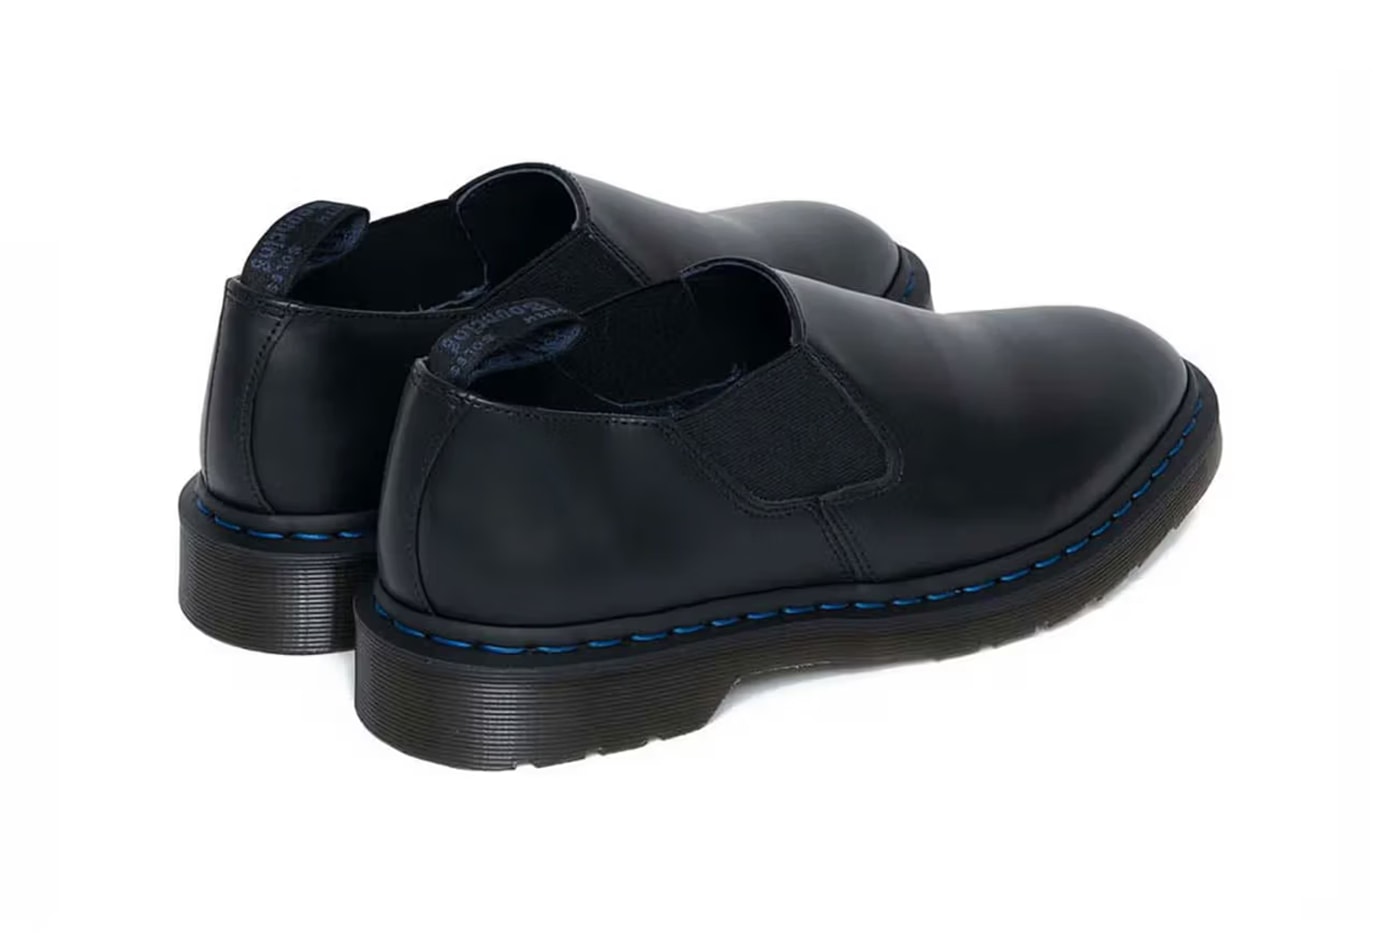 nanamica x Dr. Martens Offer Up Timeless Staples With New Collab